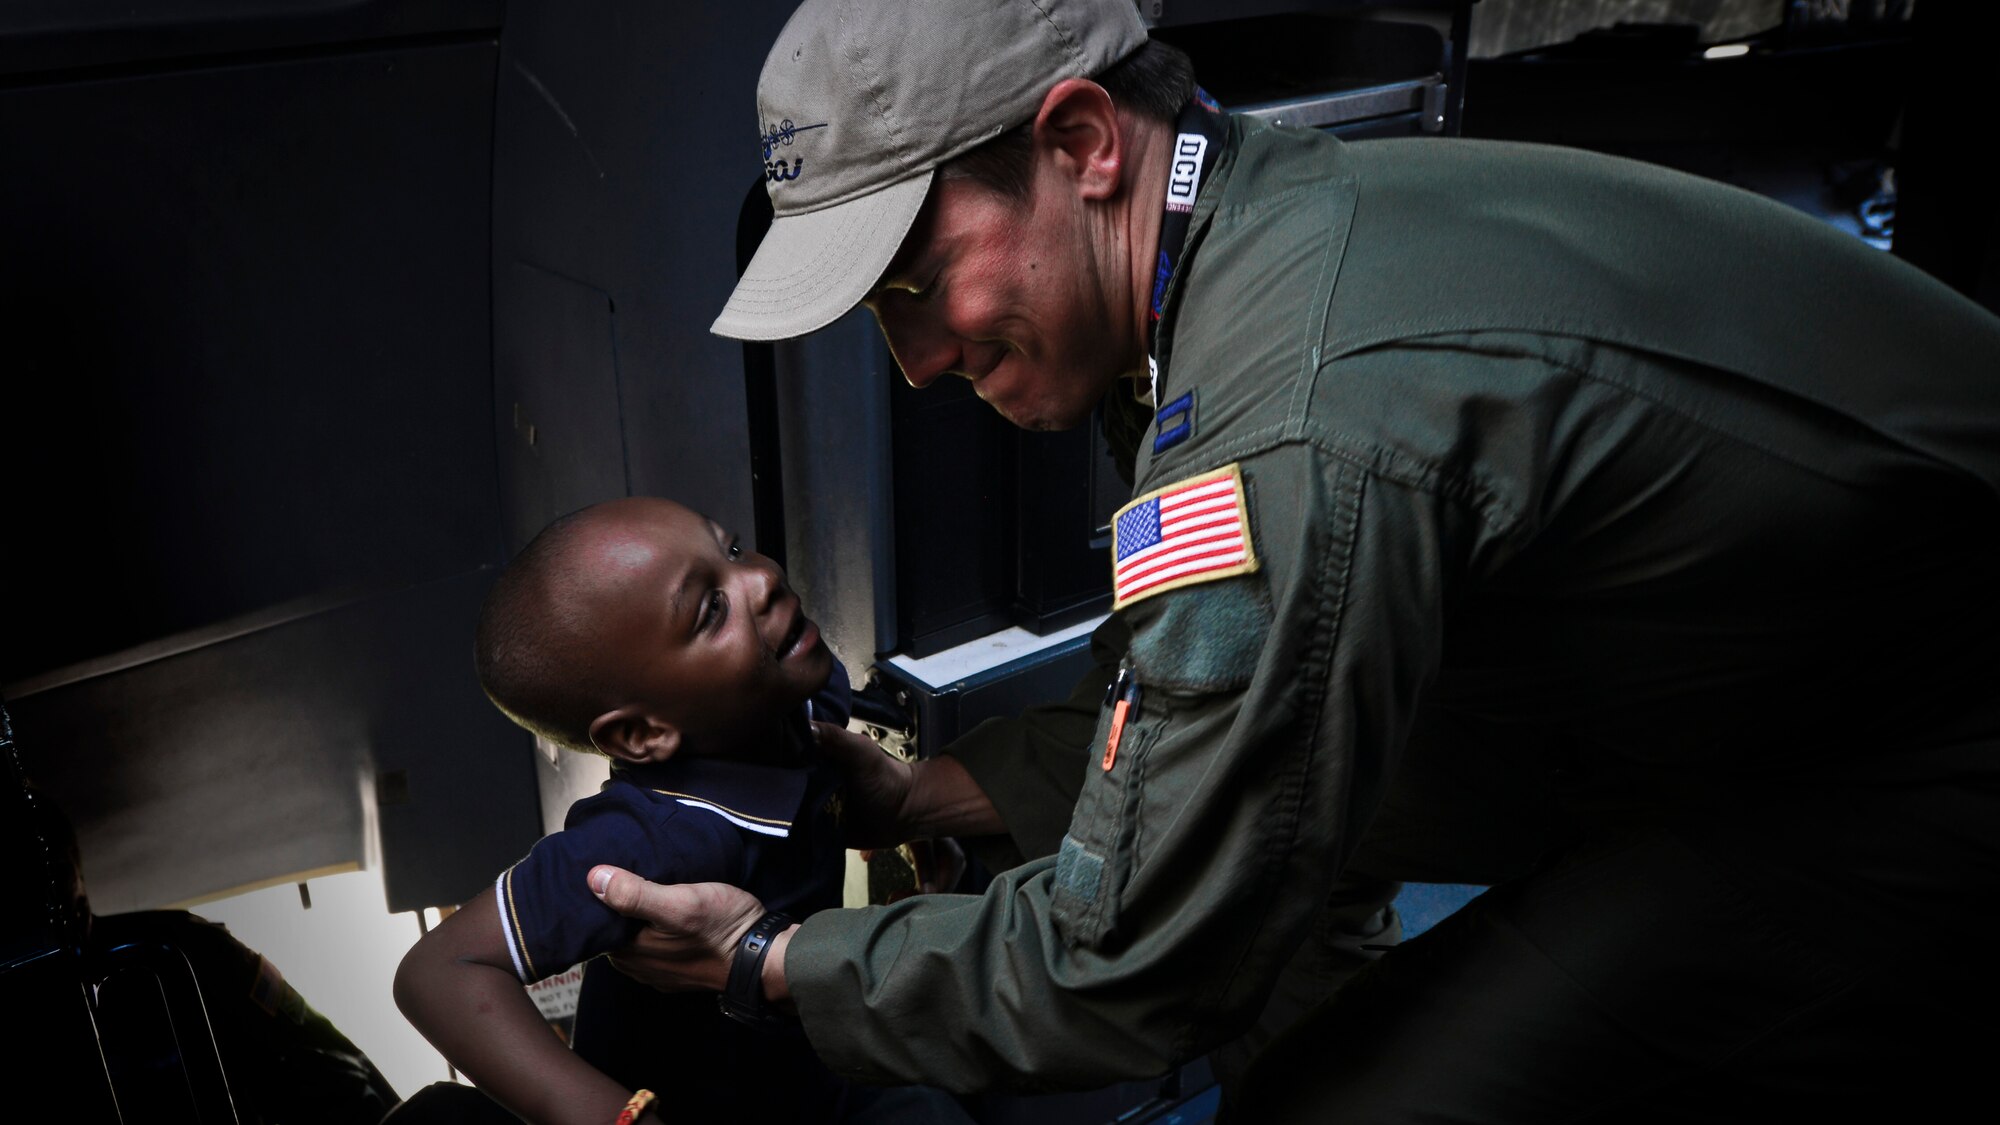 Captain Lindsey Kinsinger, 37th Airlift Squadron pilot, helps a child into the flight deck of a C-130J Super Hercules at the Africa Aerospace & Defence Expo at Waterkloof Air Force Base, South Africa, Sept. 20, 2014.  The C-130 was part of a total-force team of Guard, Reserve and active-duty Soldiers and Airmen at the expo. Air show attendees were given an opportunity to view the inside of an Air Force C-130J and C-17 Globemaster III. (U.S. Air Force photo/Staff Sgt. Travis Edwards)